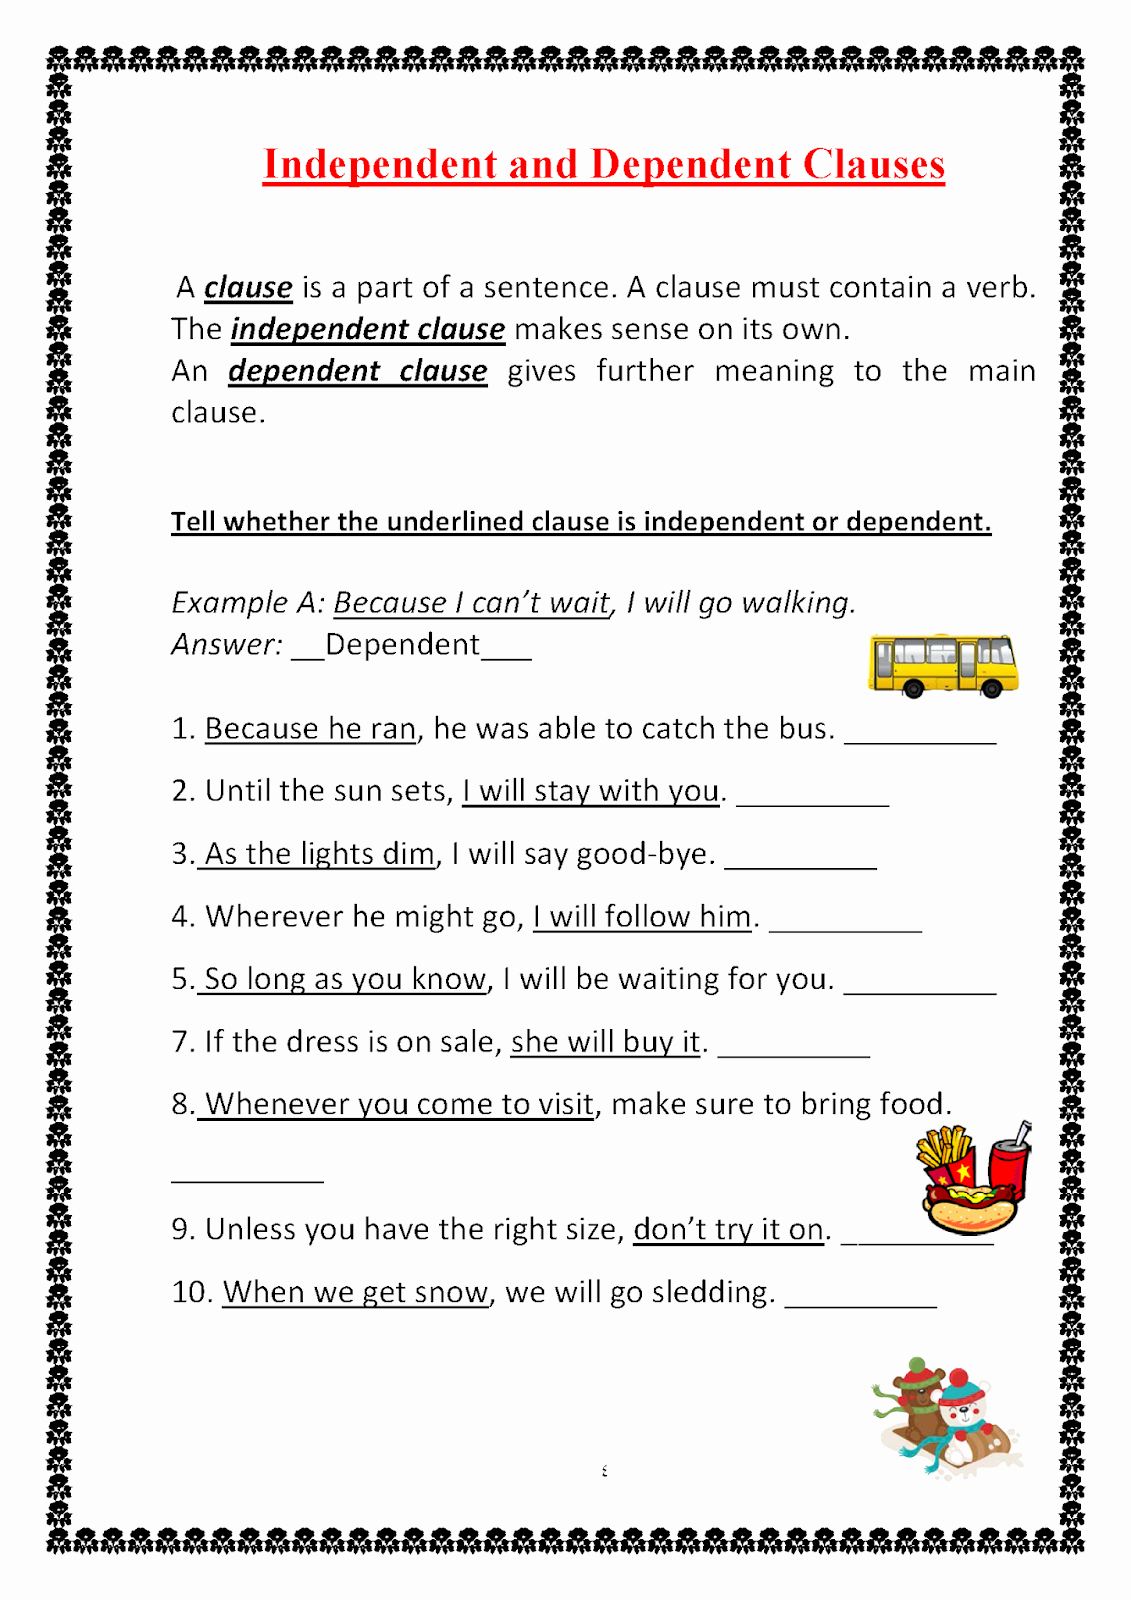 50 Independent And Dependent Clauses Worksheet